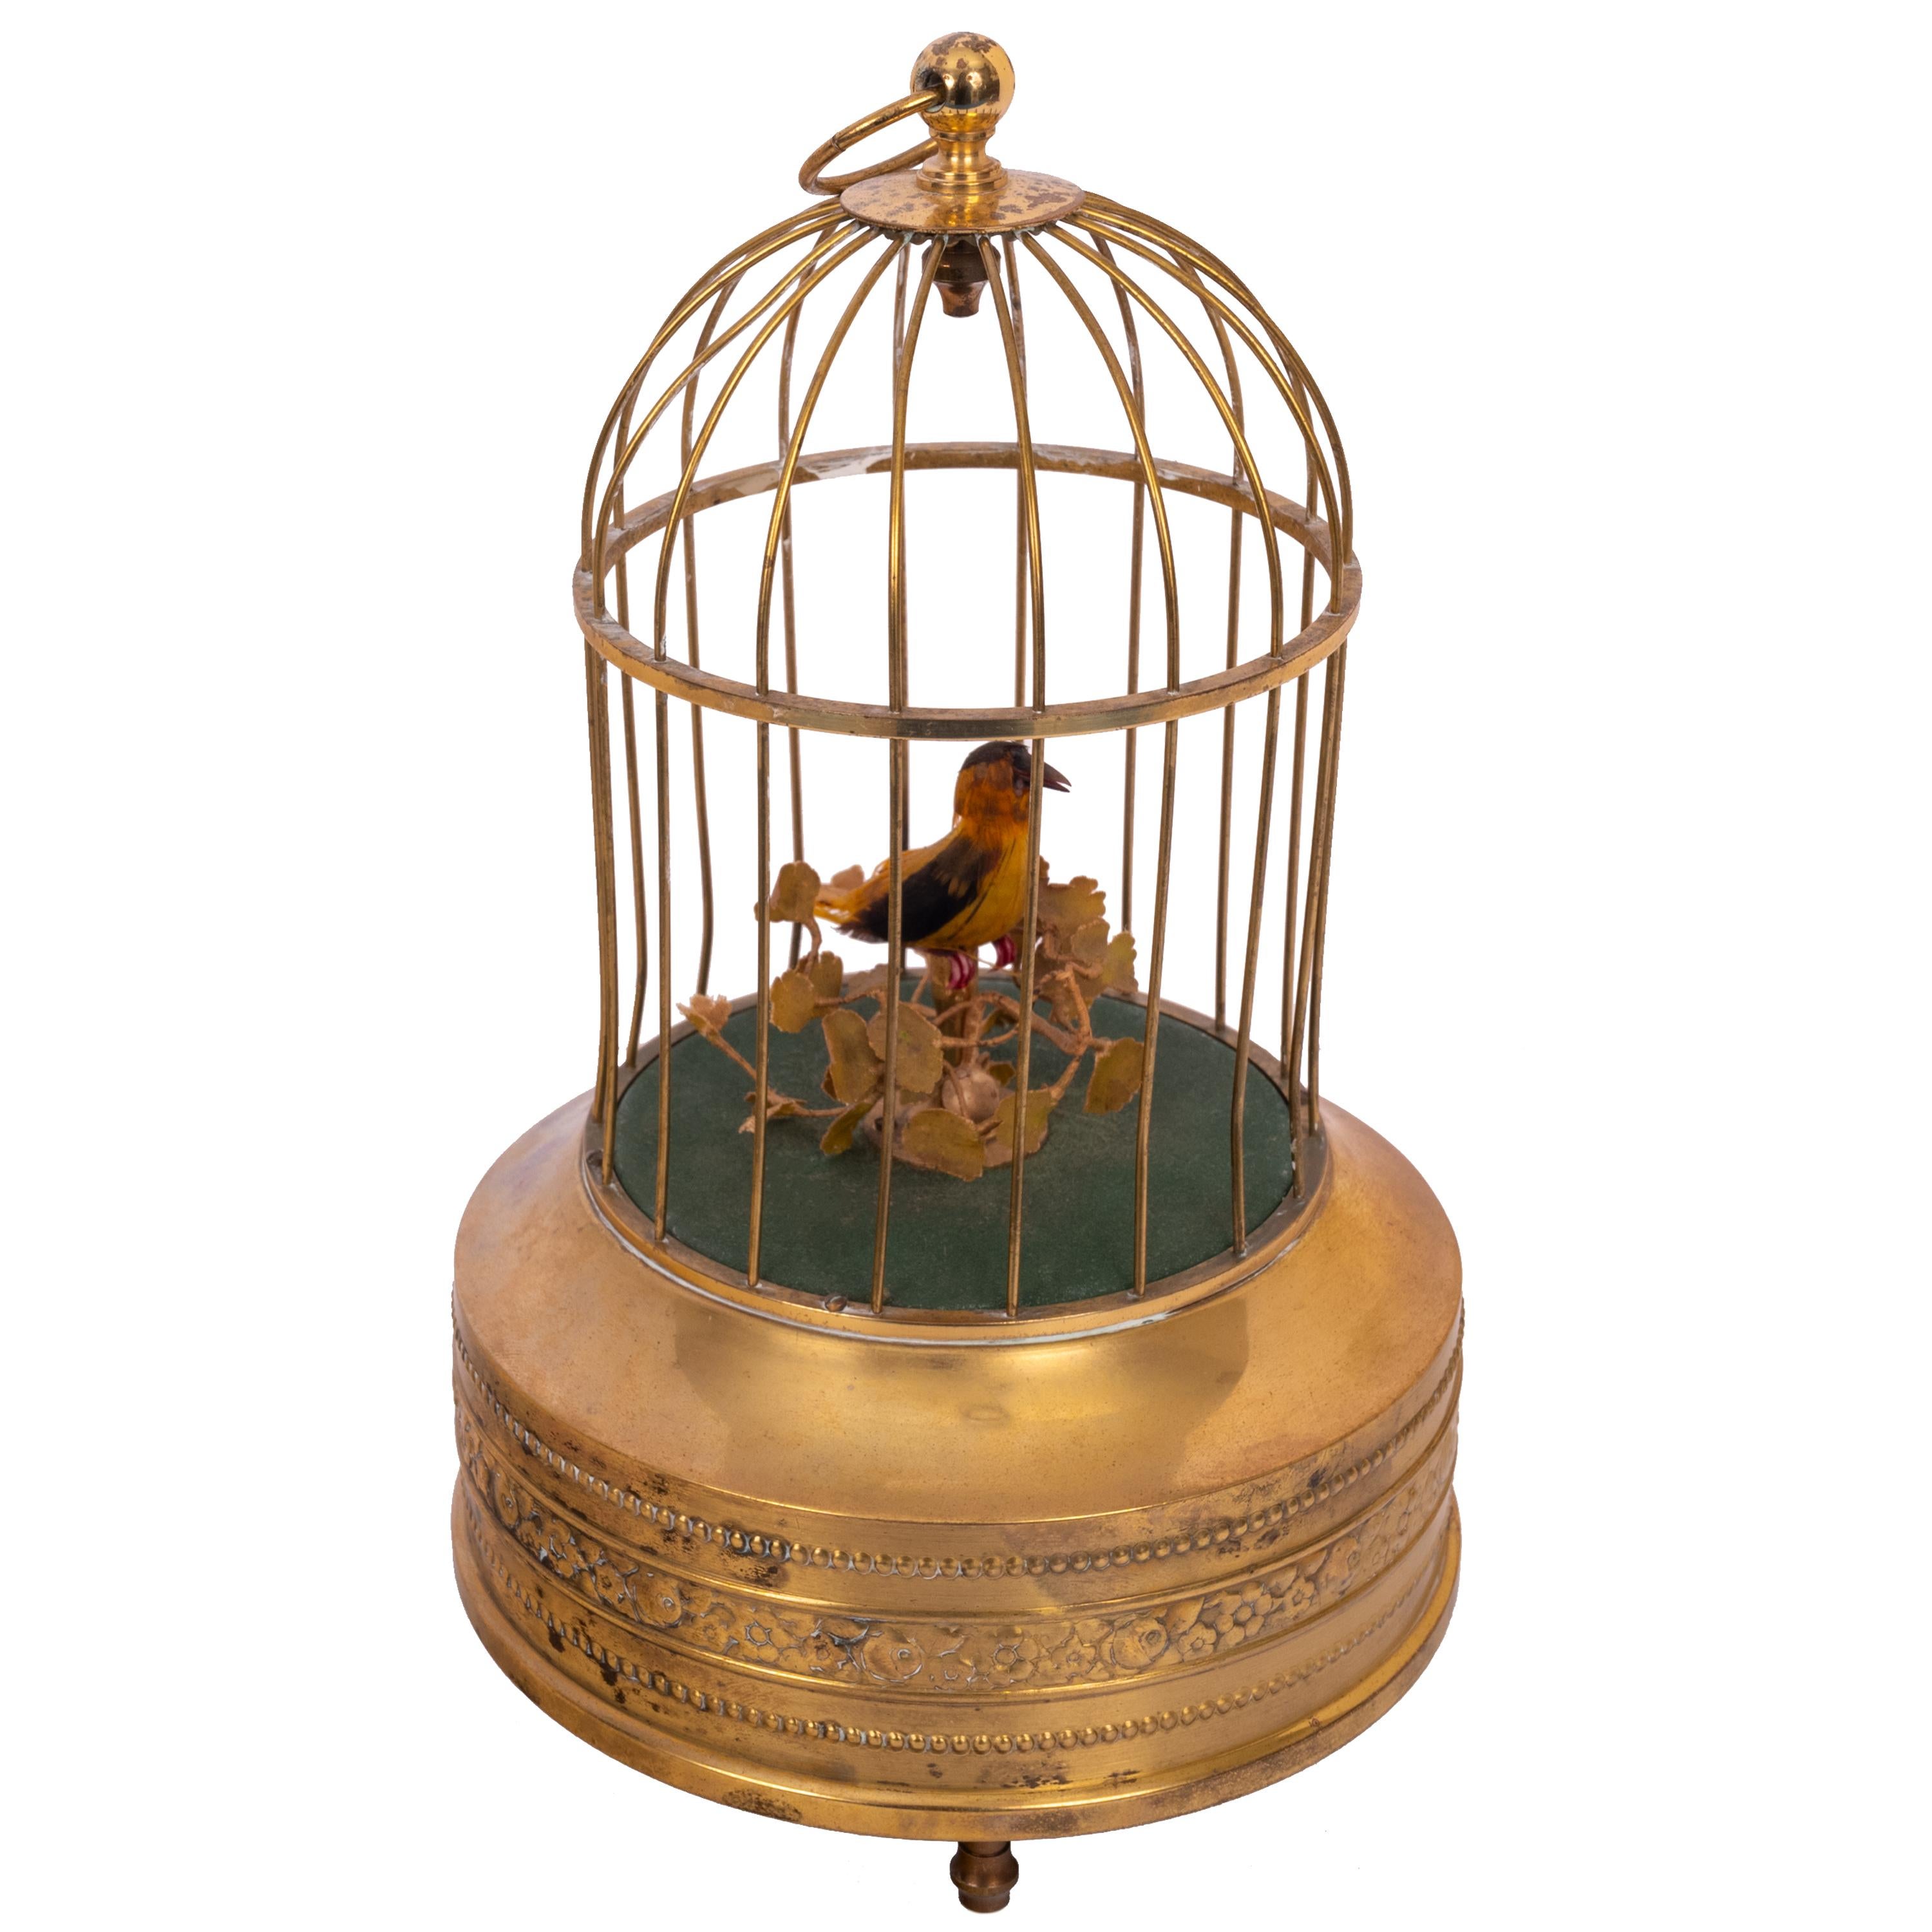 A good antique singing bird in a cage automoton, Karl Griesbaum, circa 1930
A feathered single bird sings its various bird song calls while moving its tail and beak and swiveling its head inside a brass cage. Dating from around 1930, the base is